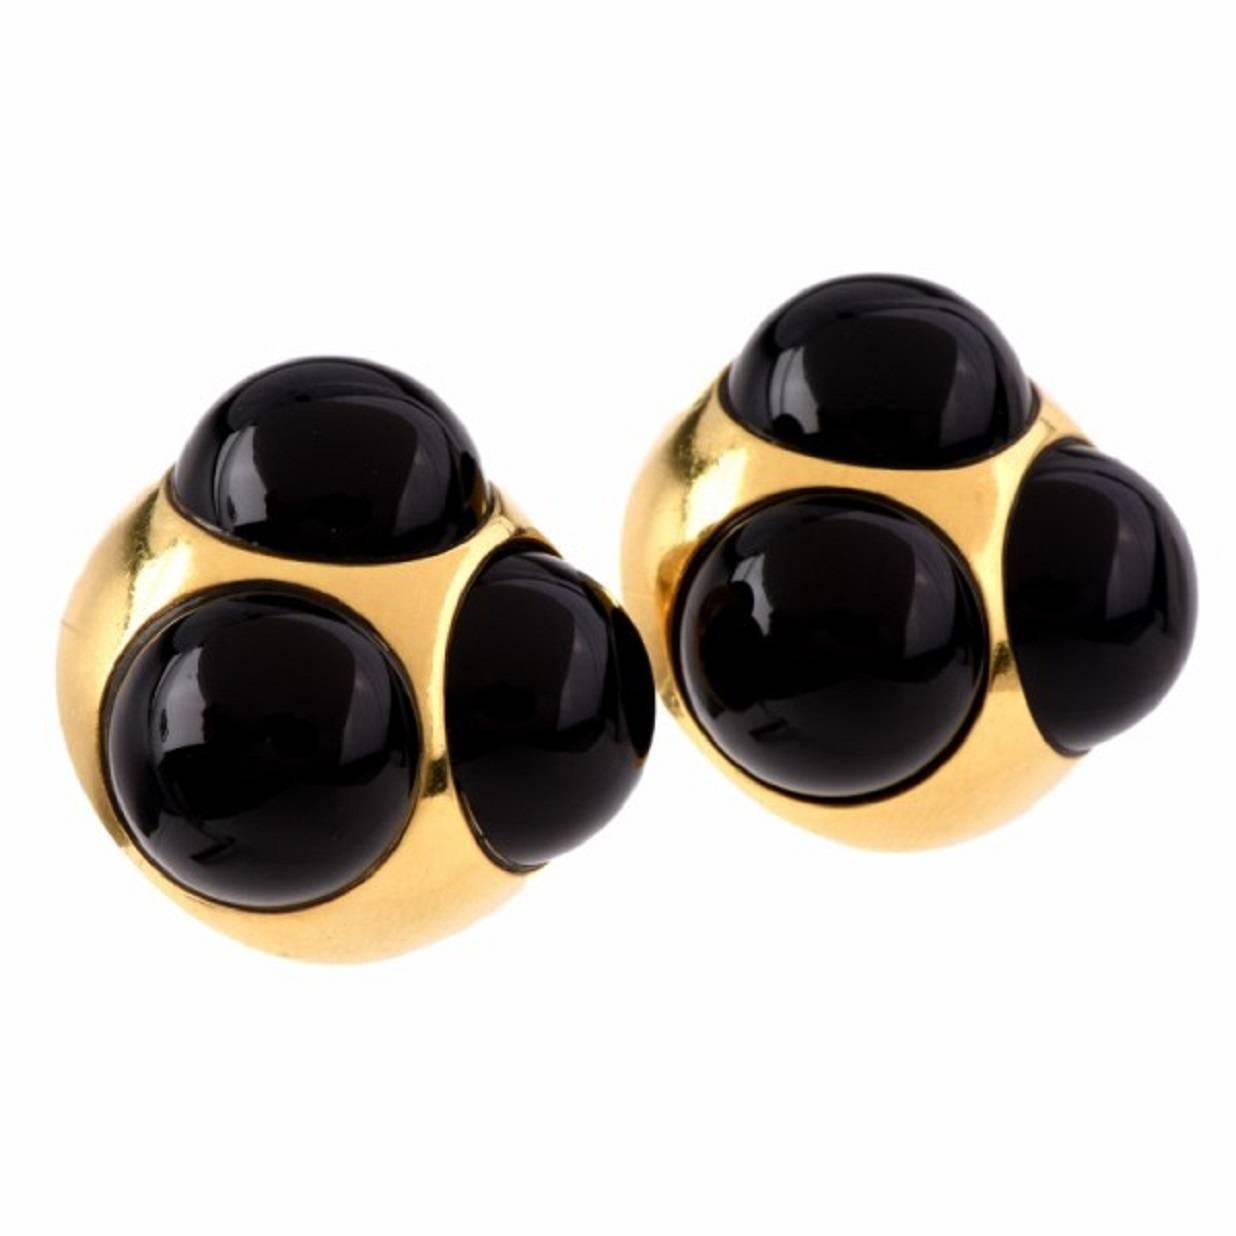 These Tiffany & Co. Paloma Picasso earrings are crafted in solid 18K yellow gold, weighing 35.1 grams and measuring 24 x 10 mm. in bold and sculptural Retro style, these earrings incorporate orbicular plaques each depicting a trio of black onyx